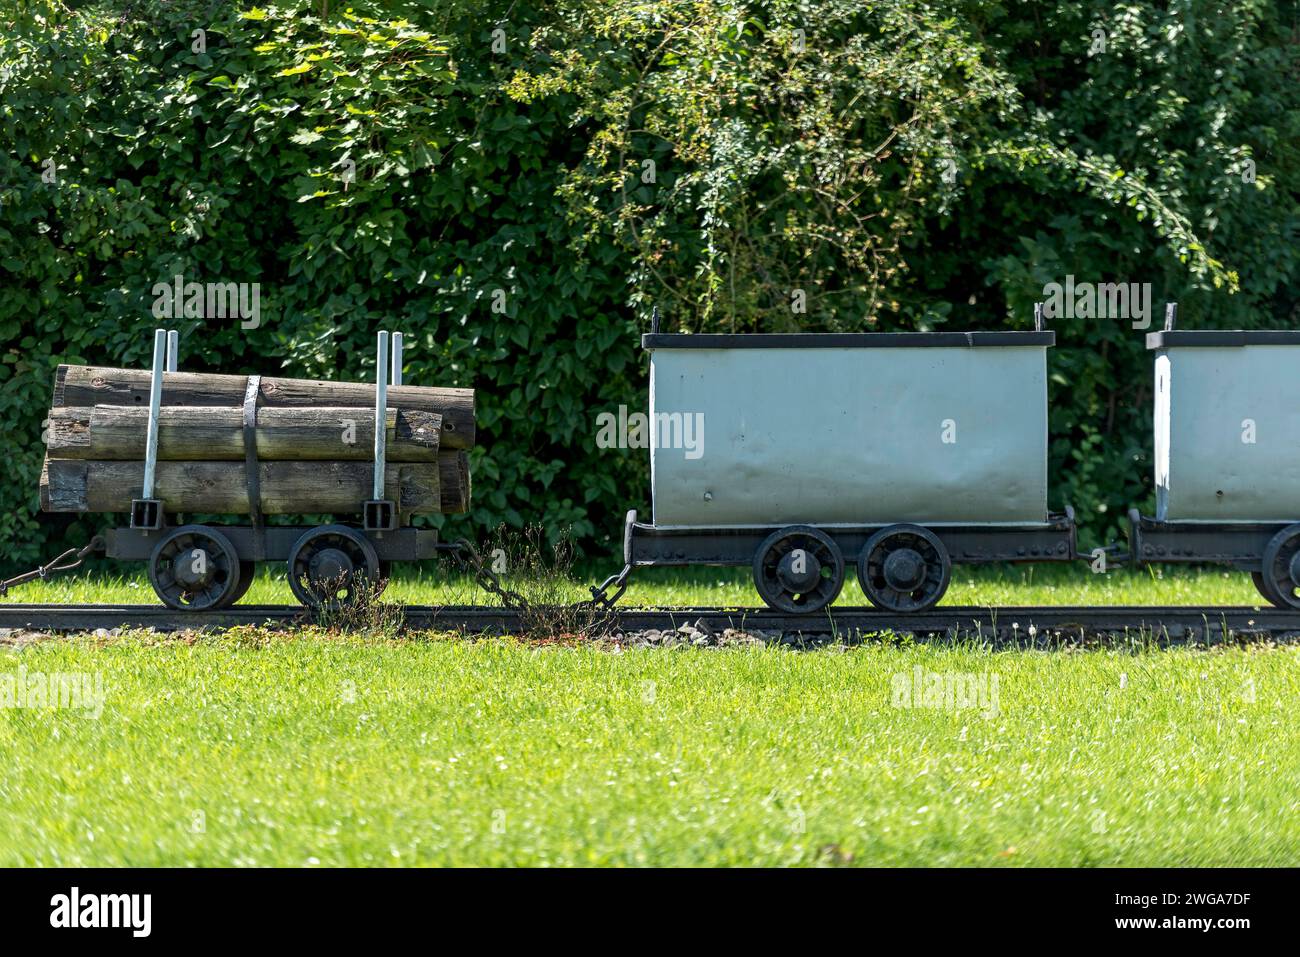 Trolleys for transporting support beams and lignite underground, mining, mine car, wagon, open-air museum at Weckesheim railway station Stock Photo